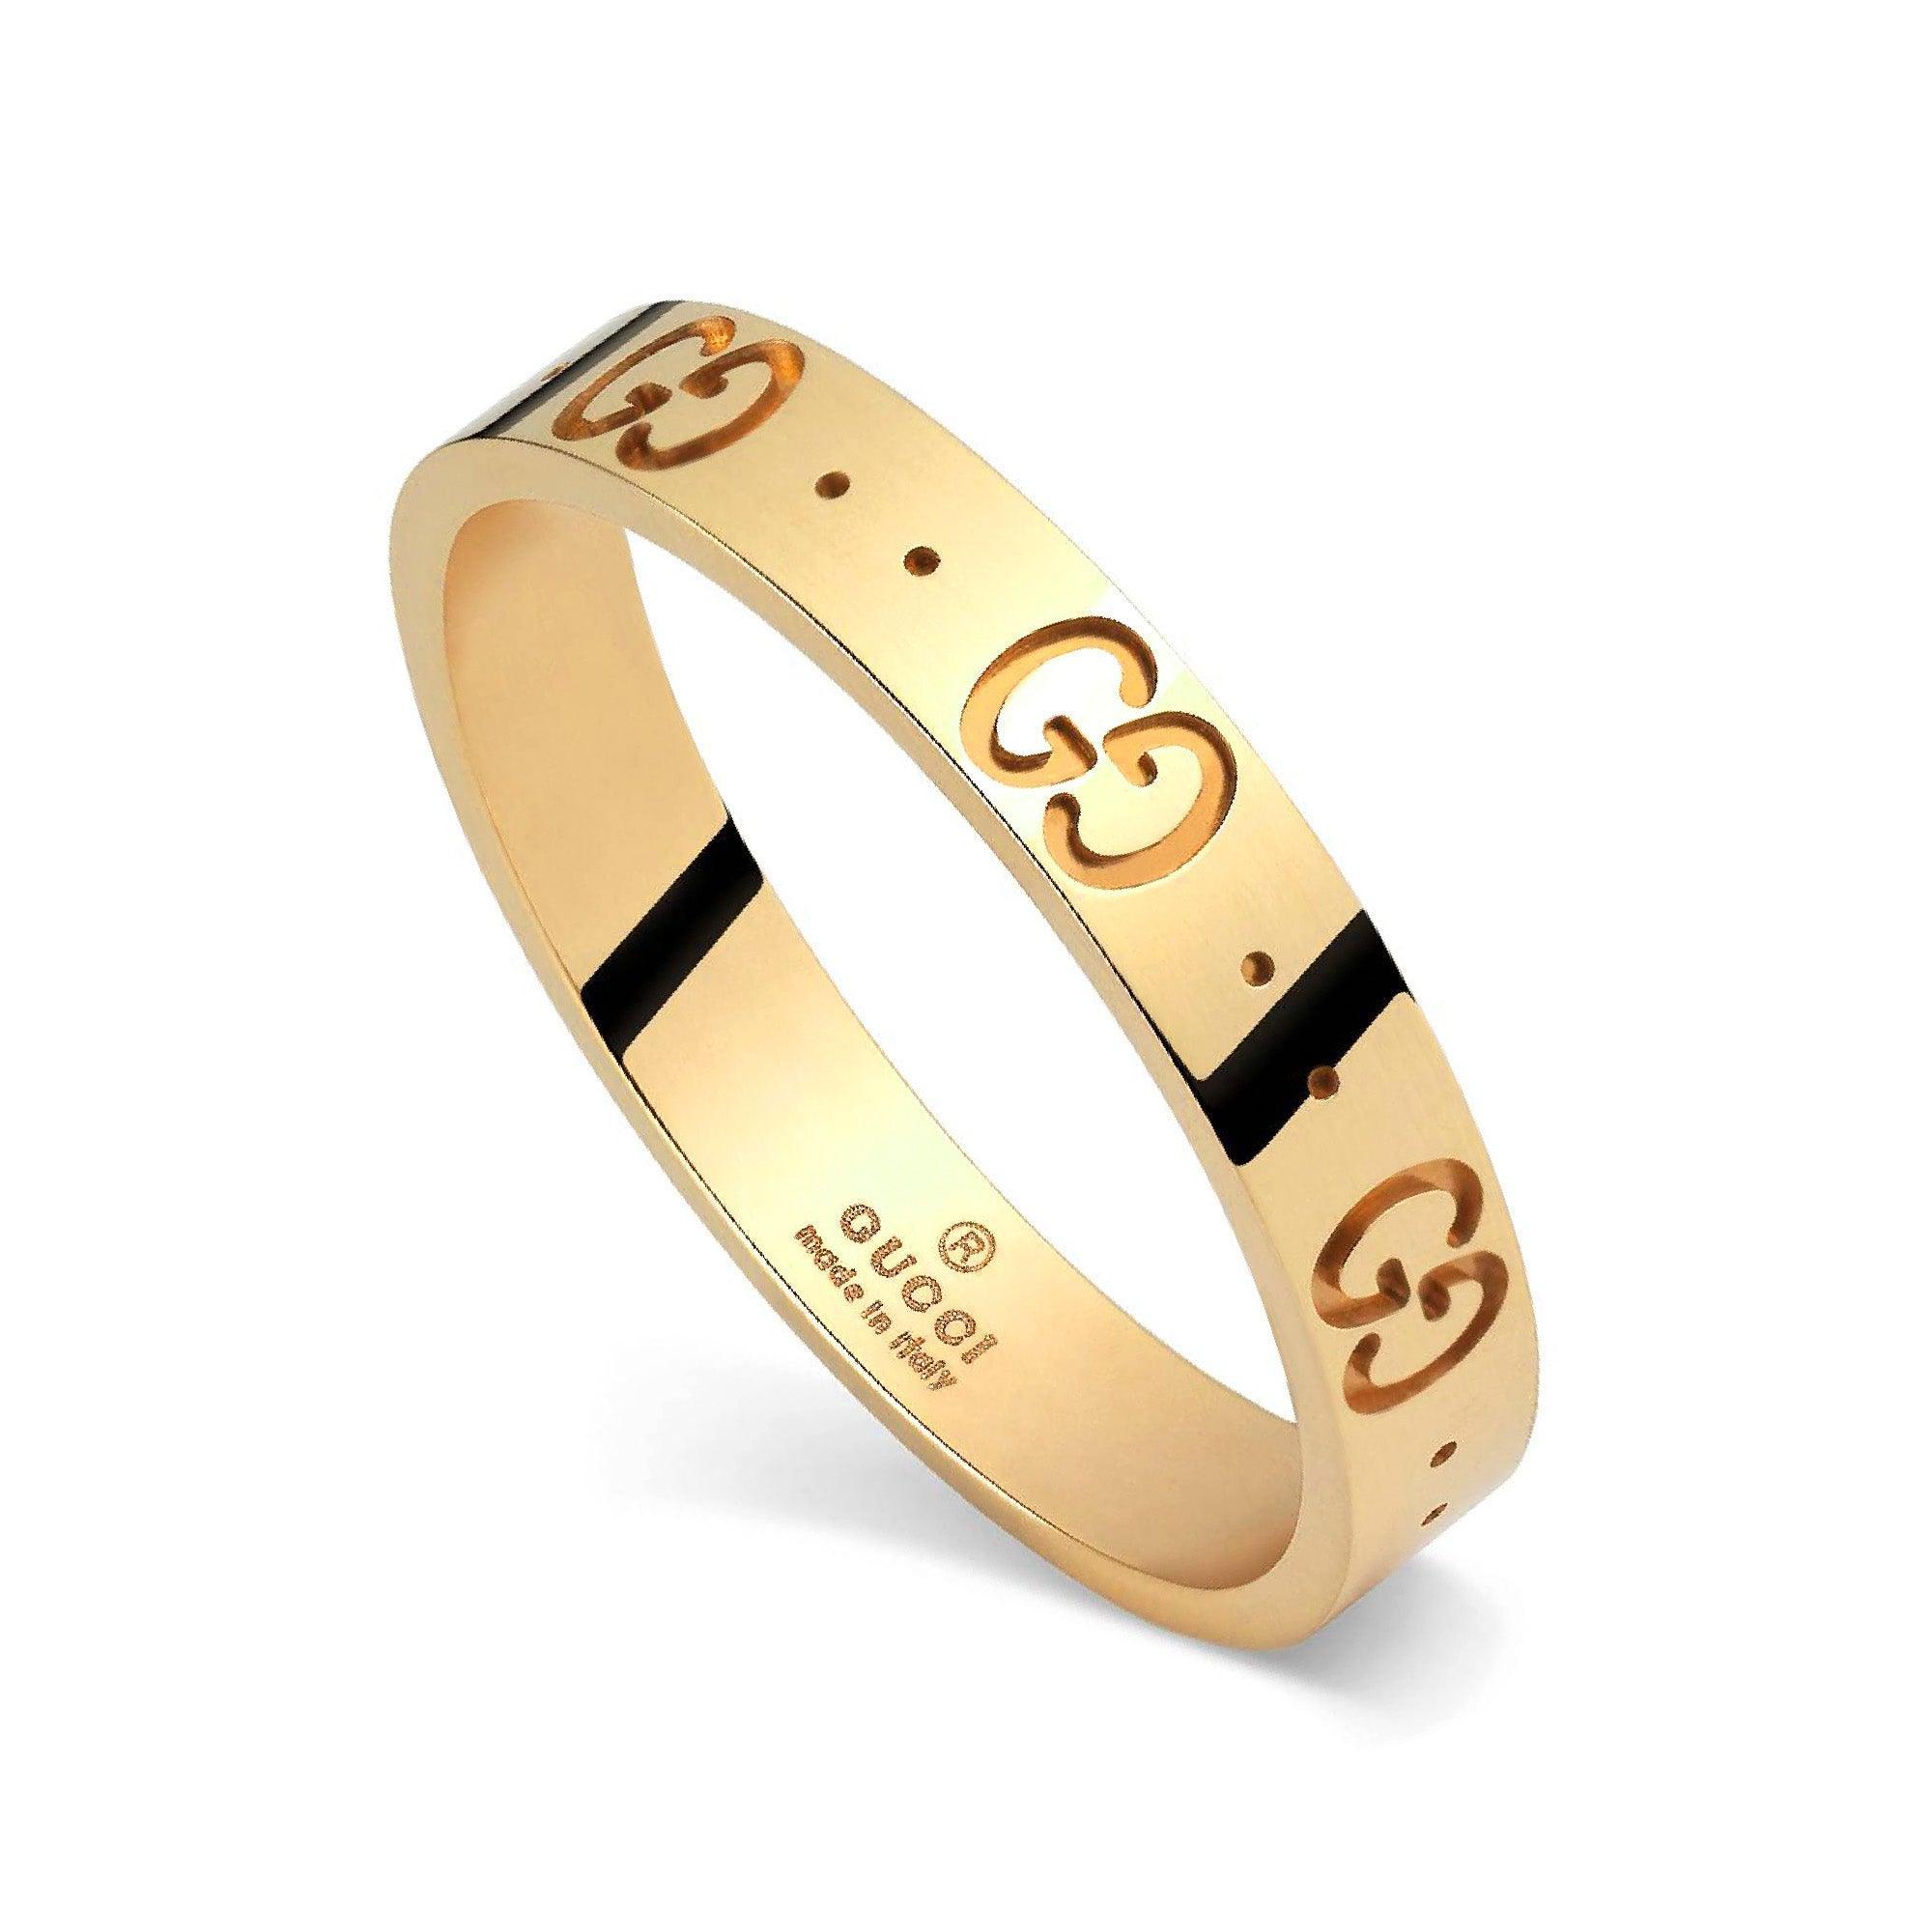 De schuld geven lineair levend 18K YELLOW GOLD GUCCI ICON RING